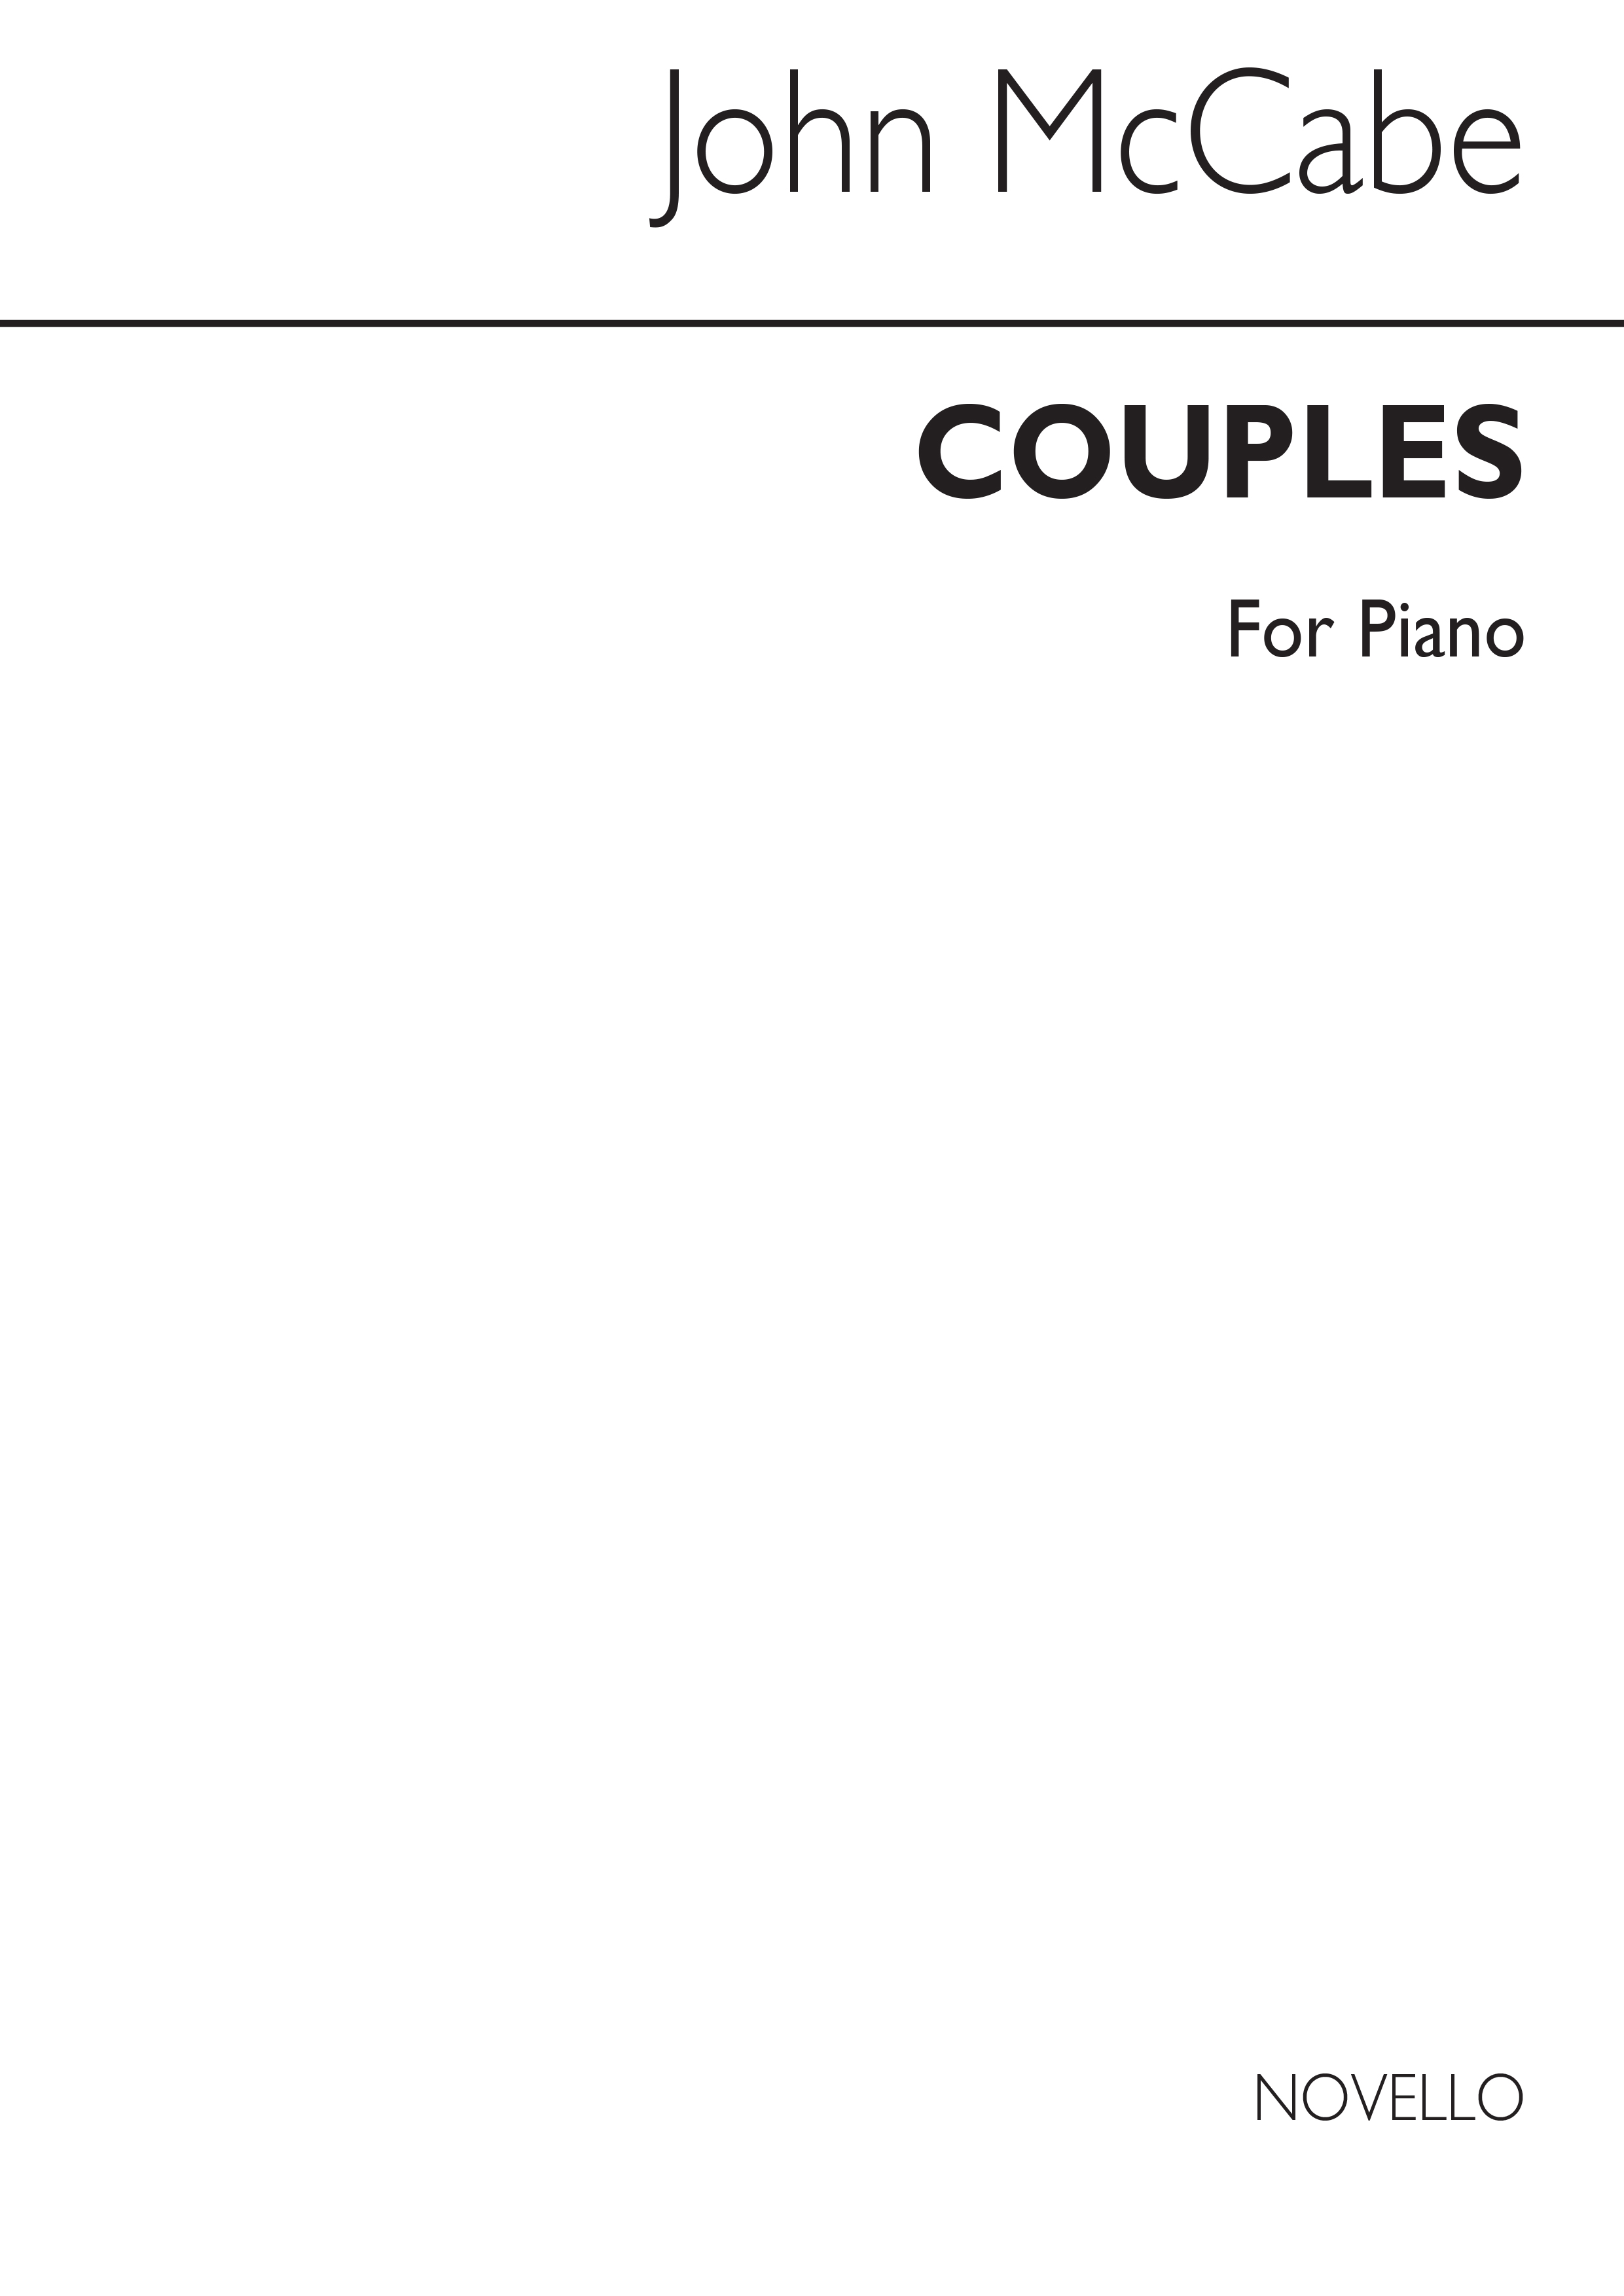 McCabe: Couples for Piano